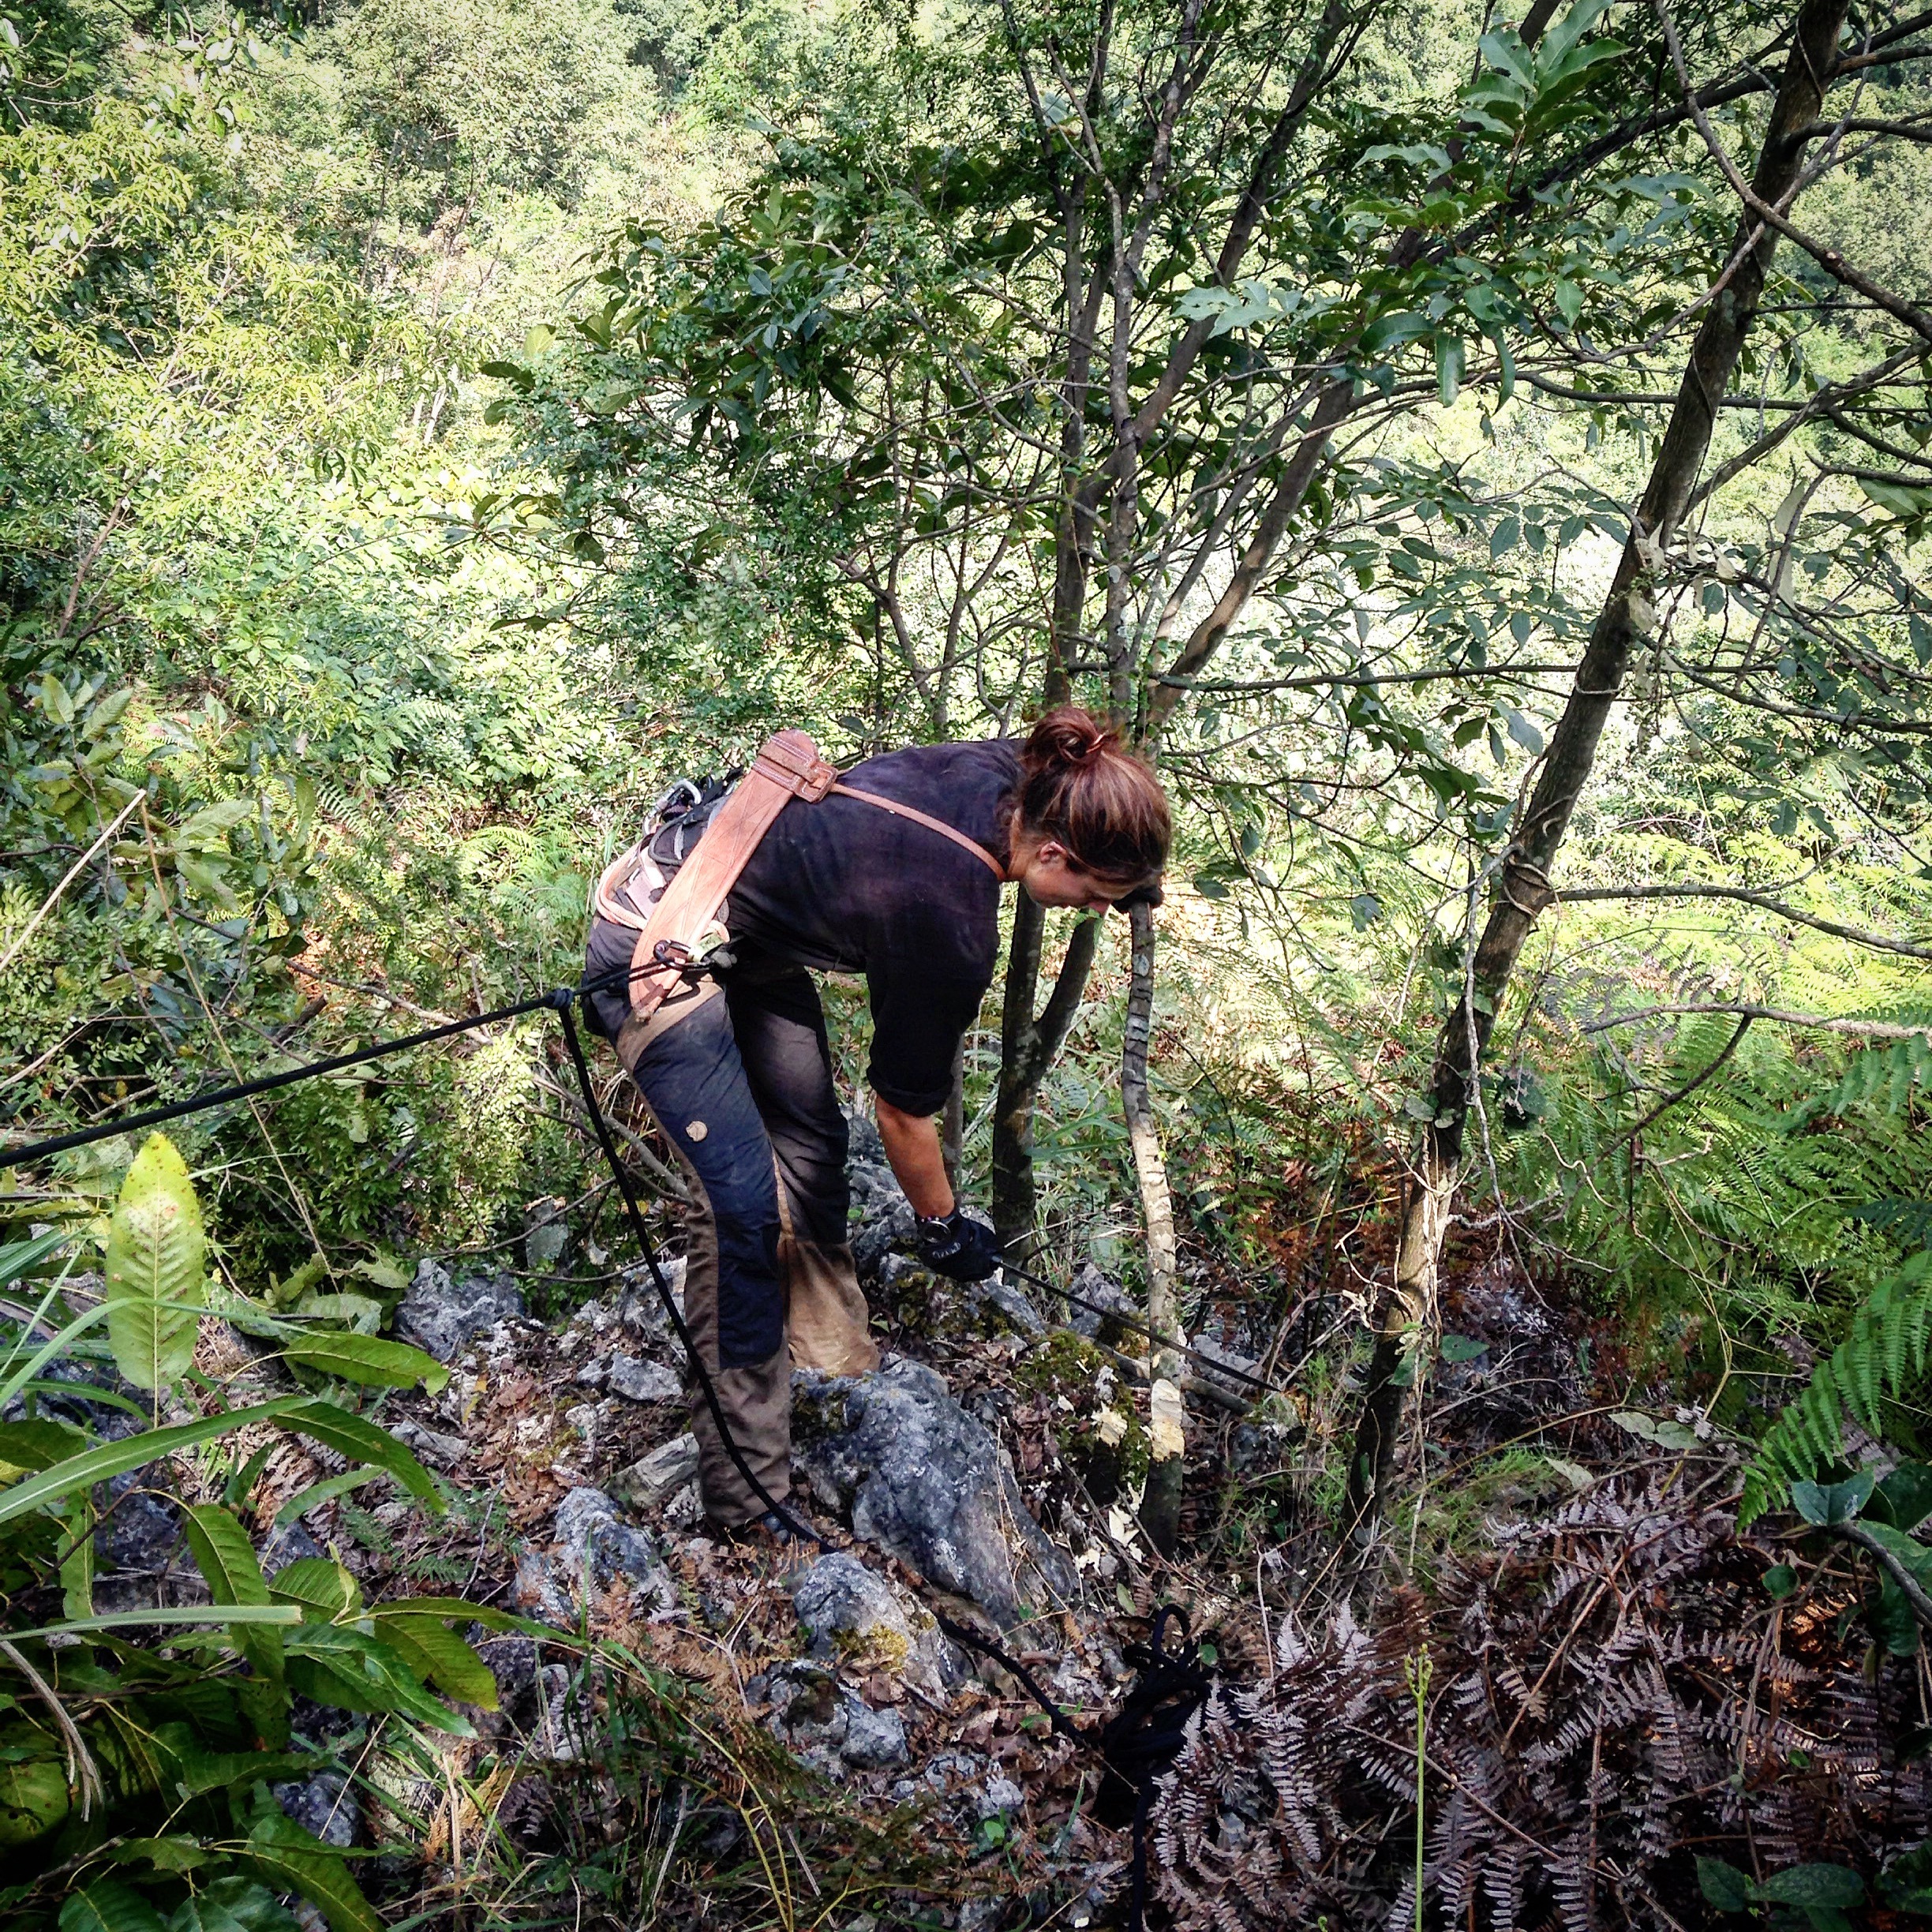 Meg cutting a tree on a steep slope in the jungle